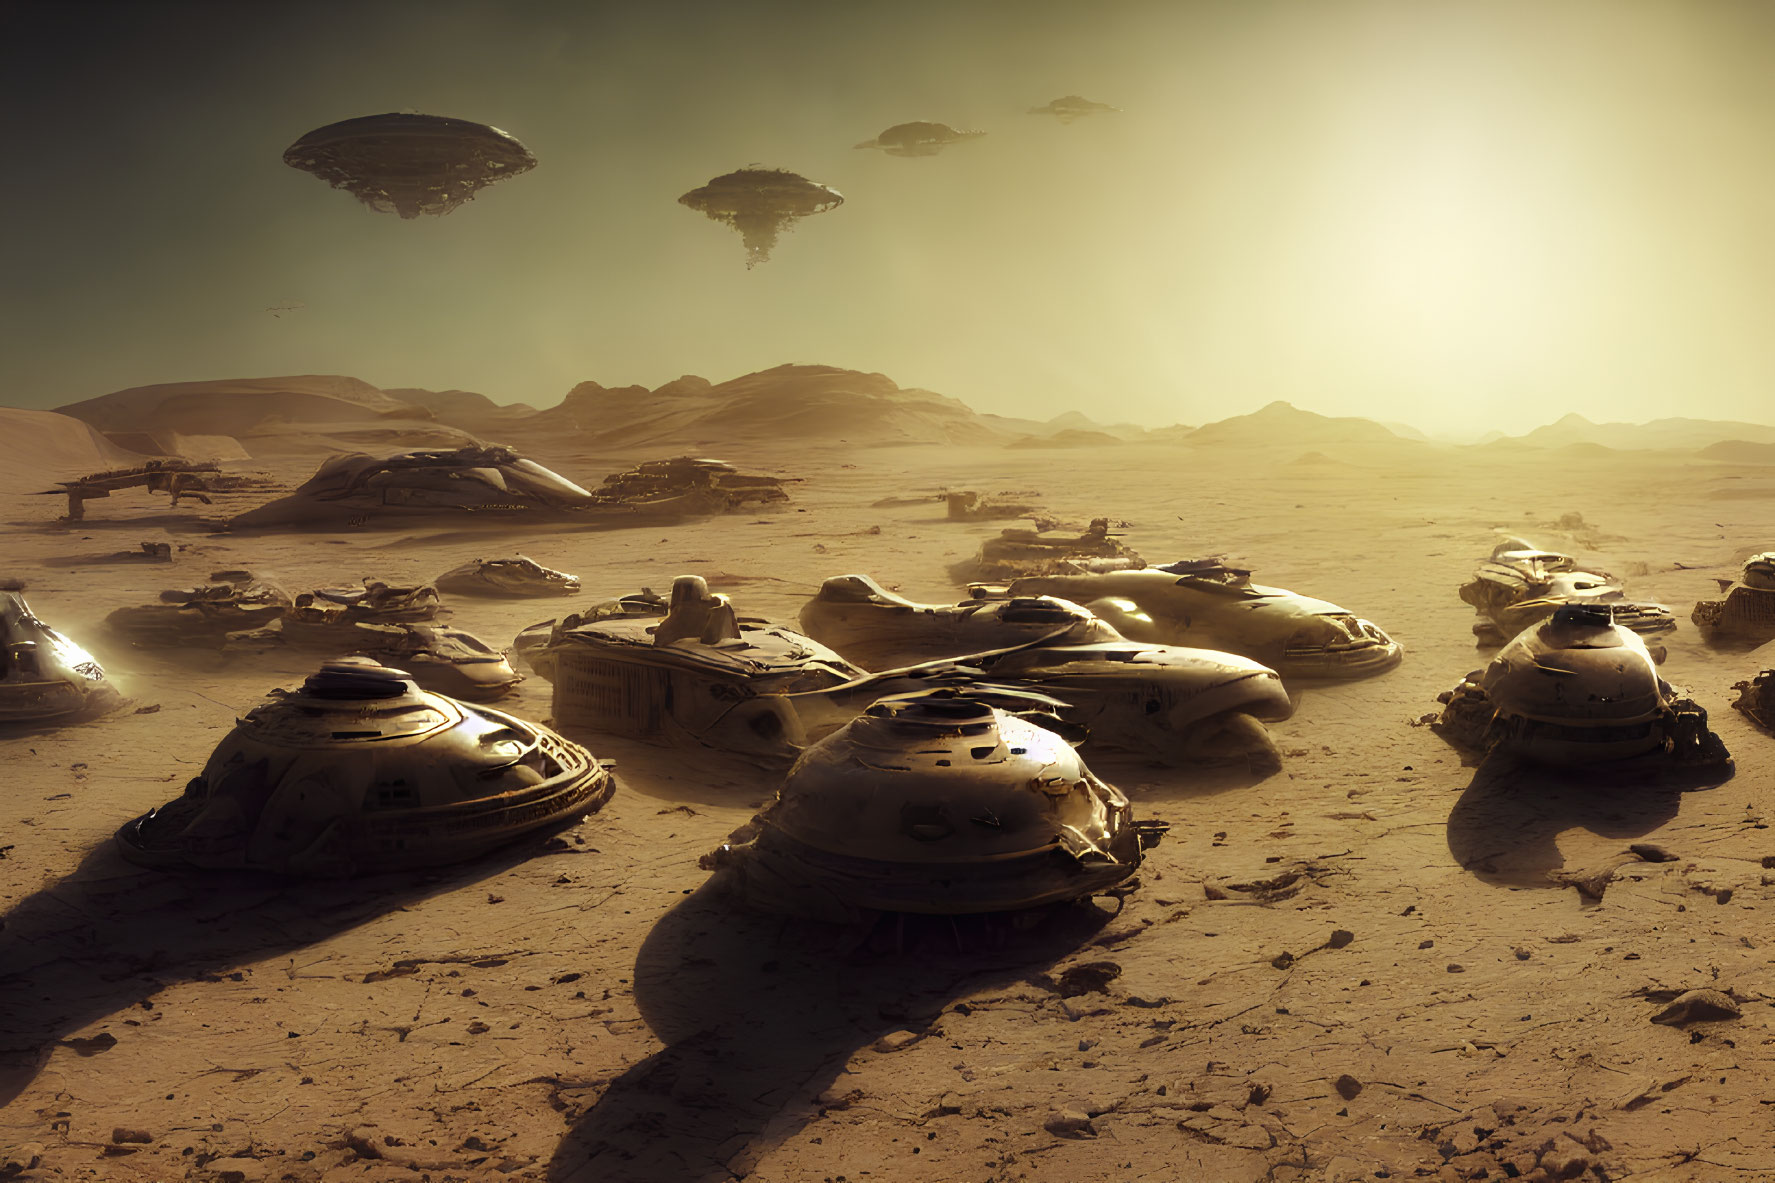 Sunlit sci-fi desert with abandoned spacecraft and hovering ships